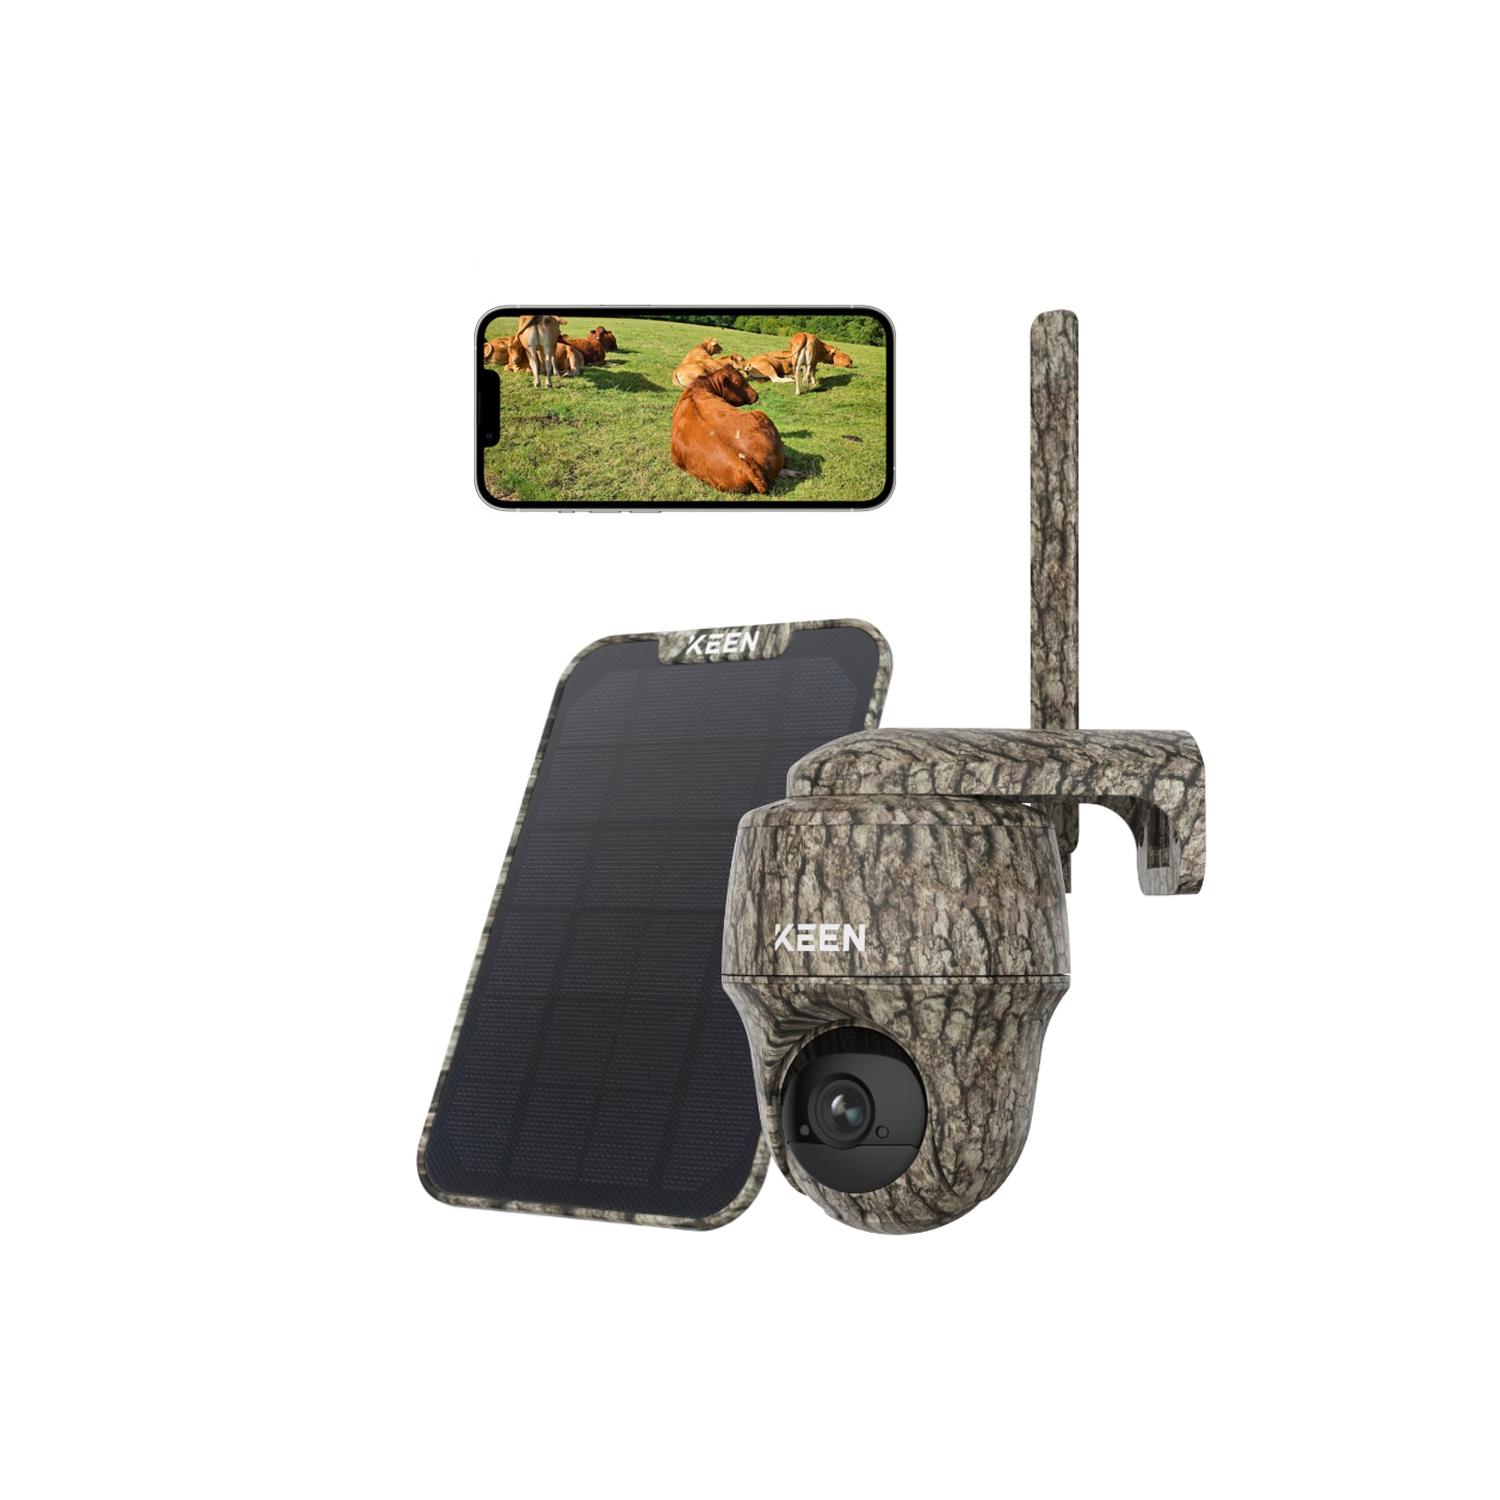 Reolink 4G Trail Security Camera Pan & Tilt, 2K 4MP Super HD, Battery/Solar Powered, Person/Vehicle Detection, Two-Way Audio